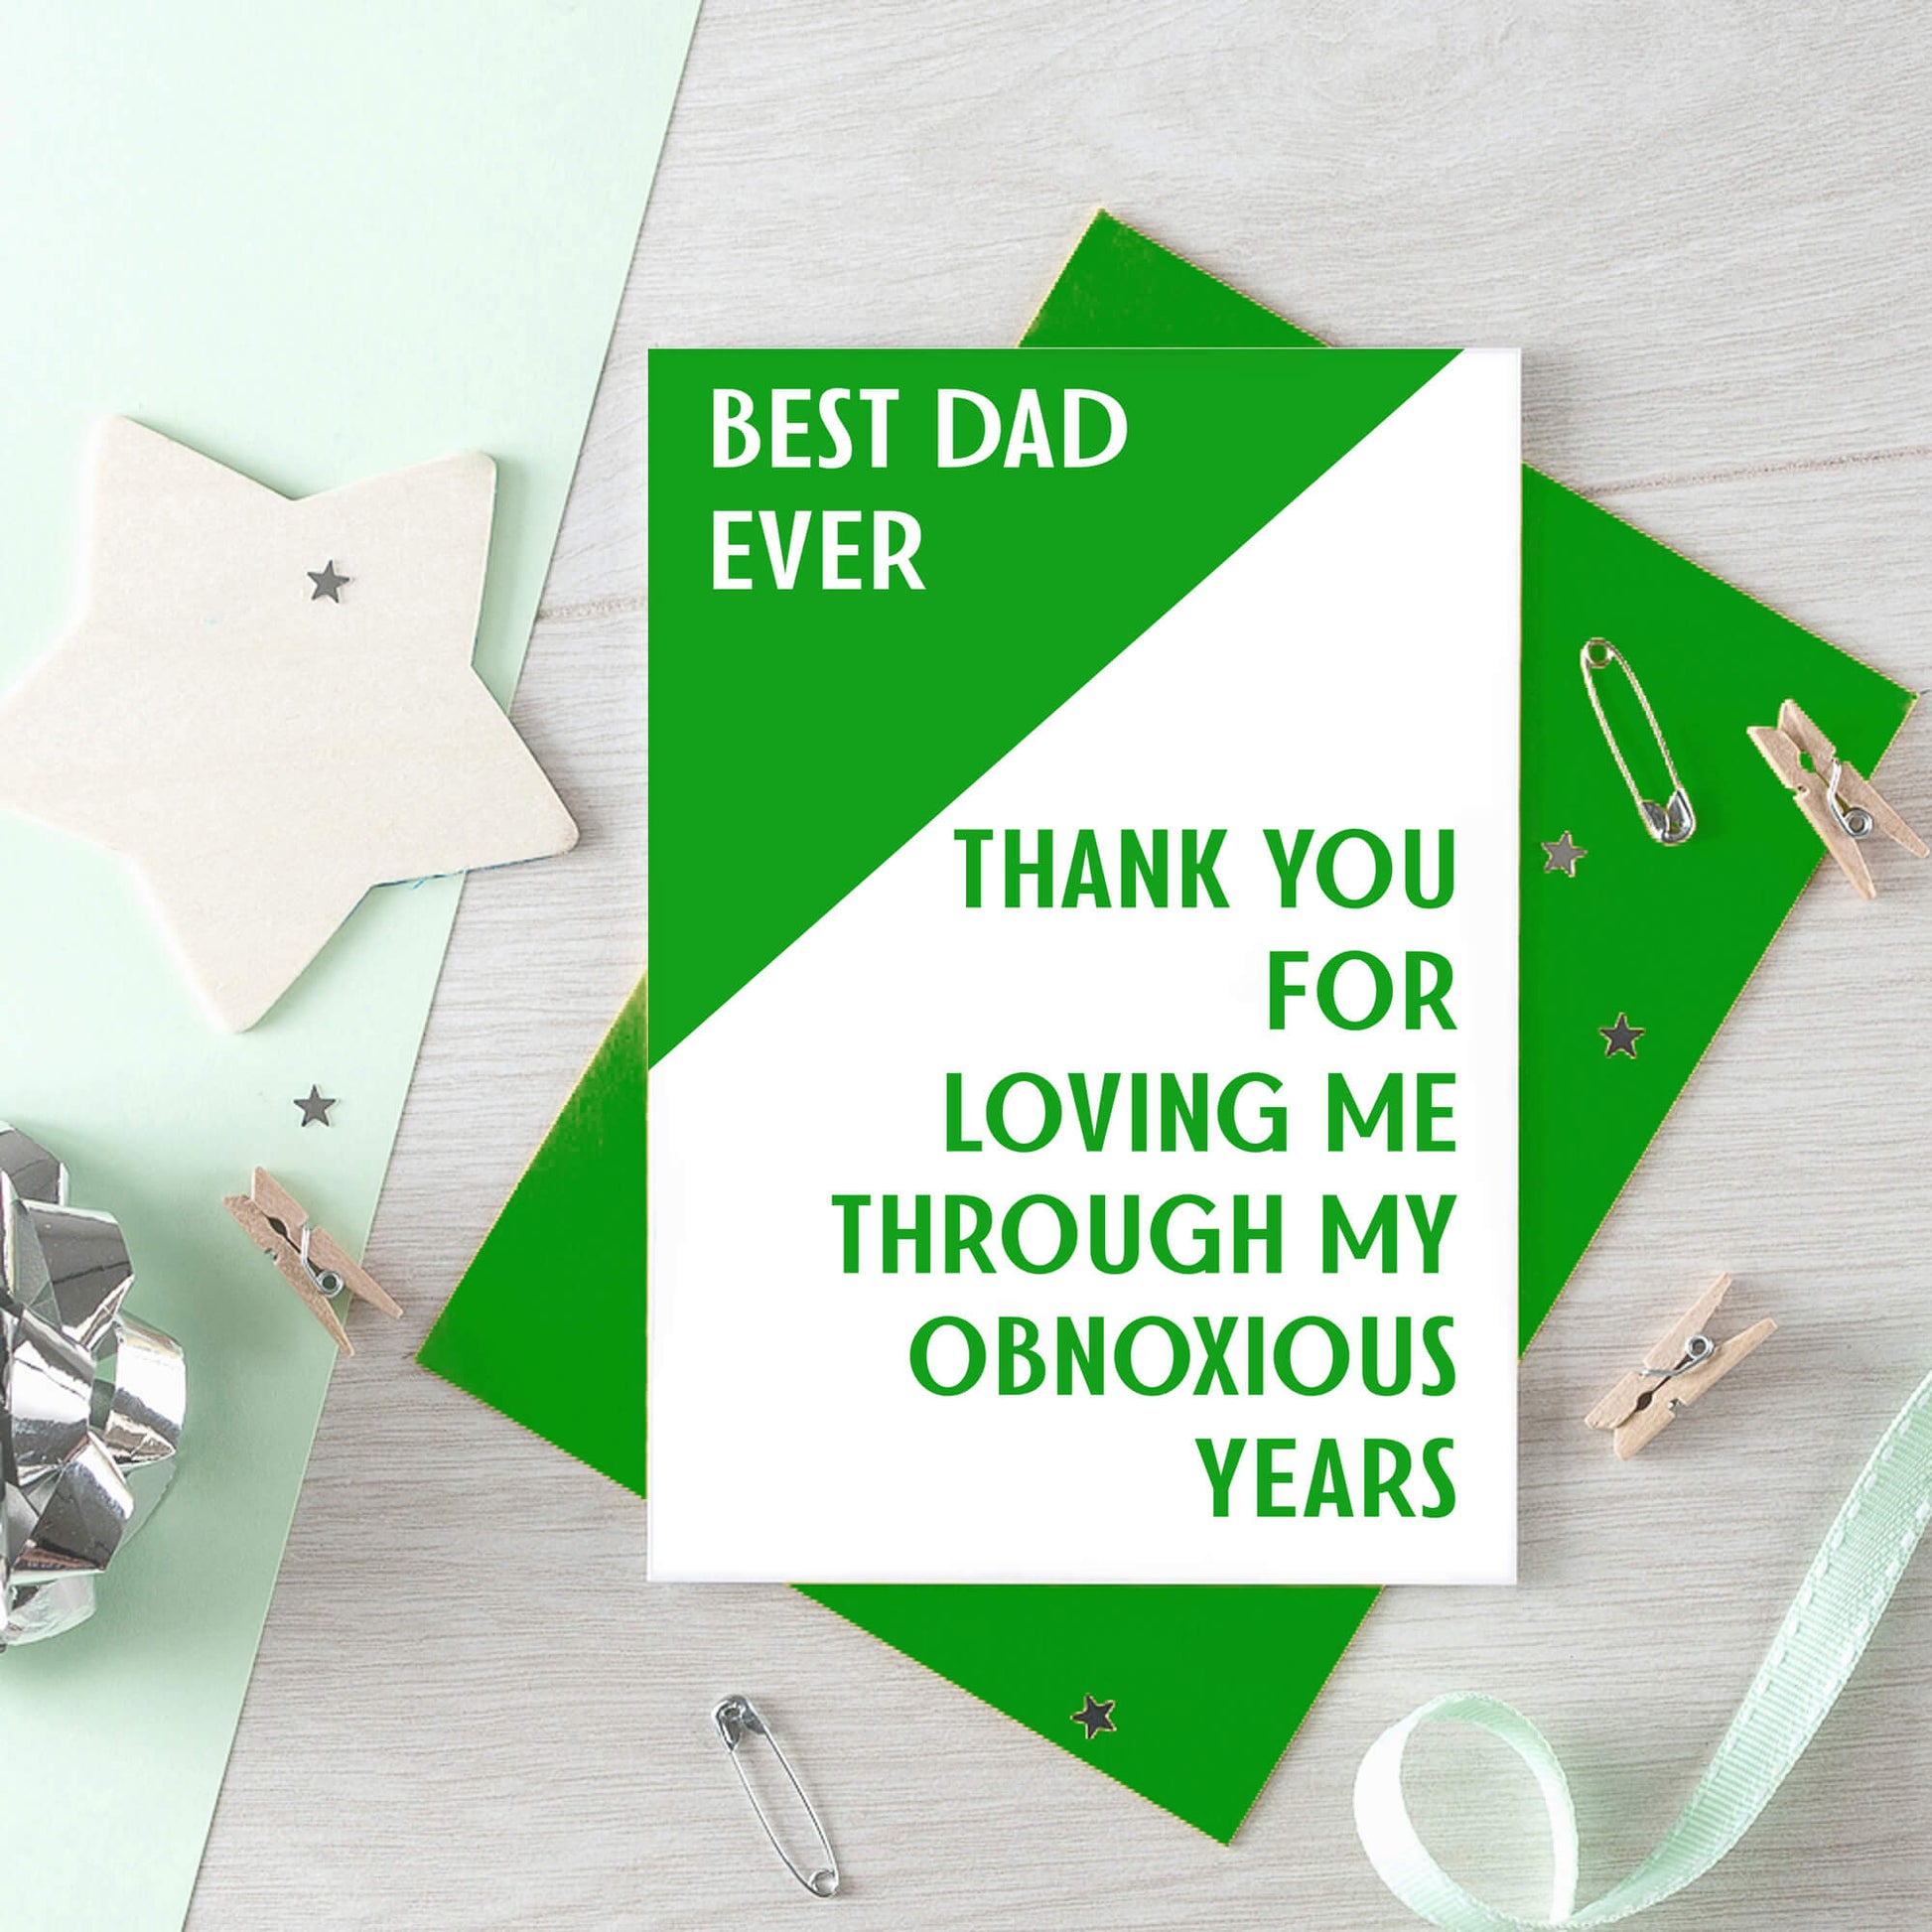 Dad Card by SixElevenCreations. Reads Best Dad Ever Thank you for loving me through my obnoxious years. Product Code SE3005A6